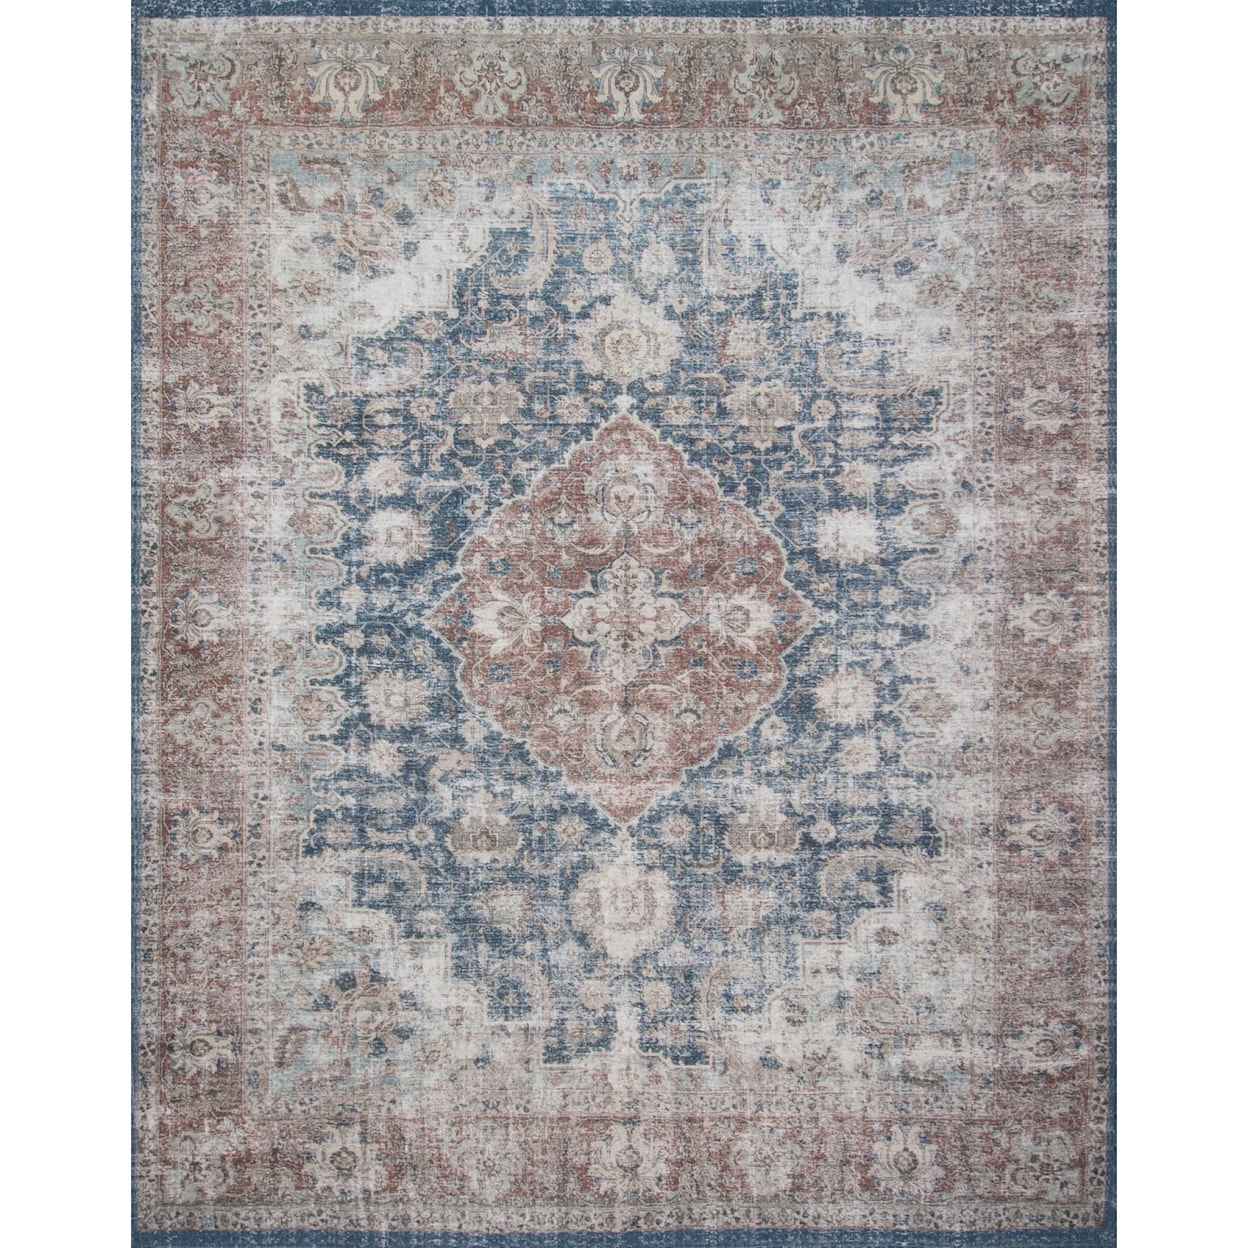 Magnolia Home by Joanna Gaines for Loloi Lucca 2'-6" x 7'-6" Rug